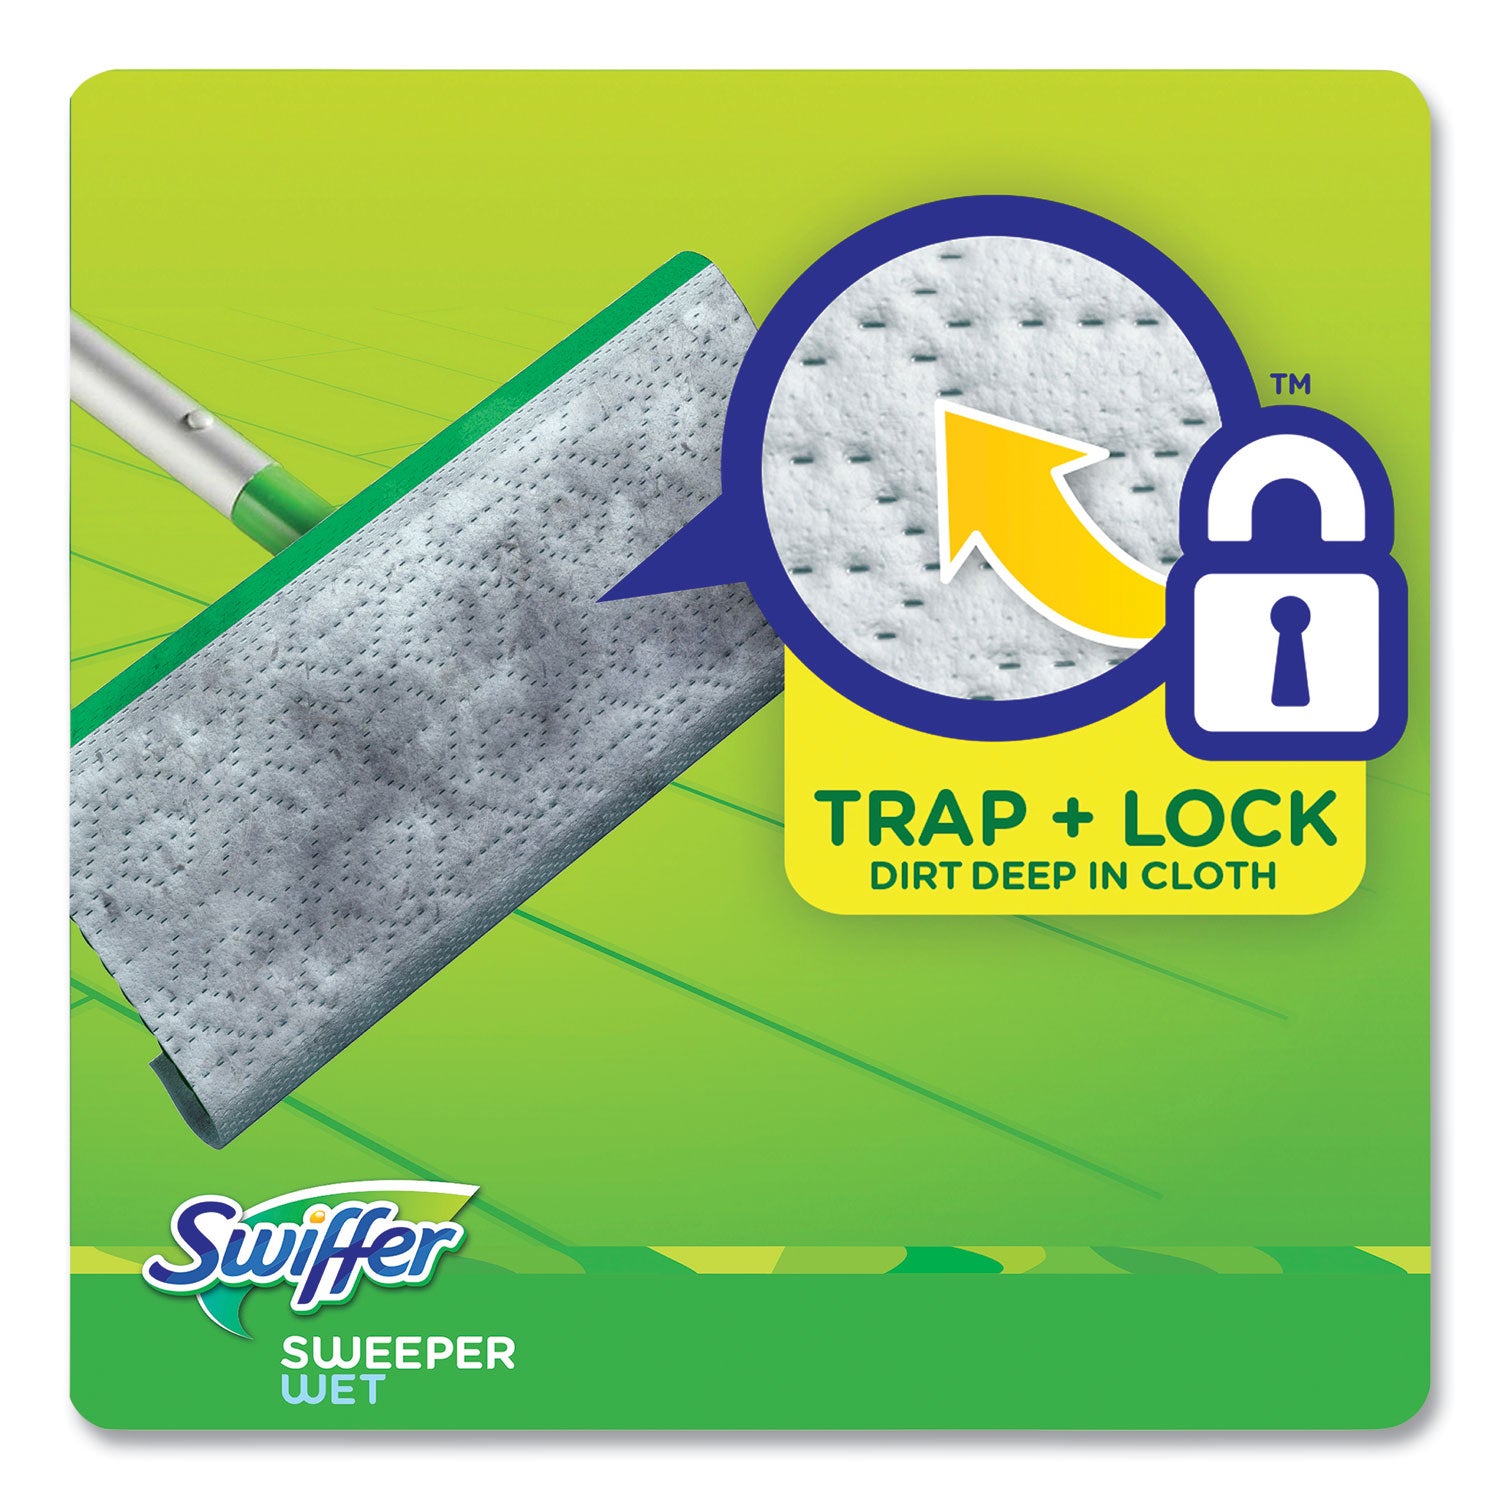 sweeper-trap-+-lock-wet-mop-cloth-8-x-10-white-open-window-scent-38-pack_pgc00742 - 4